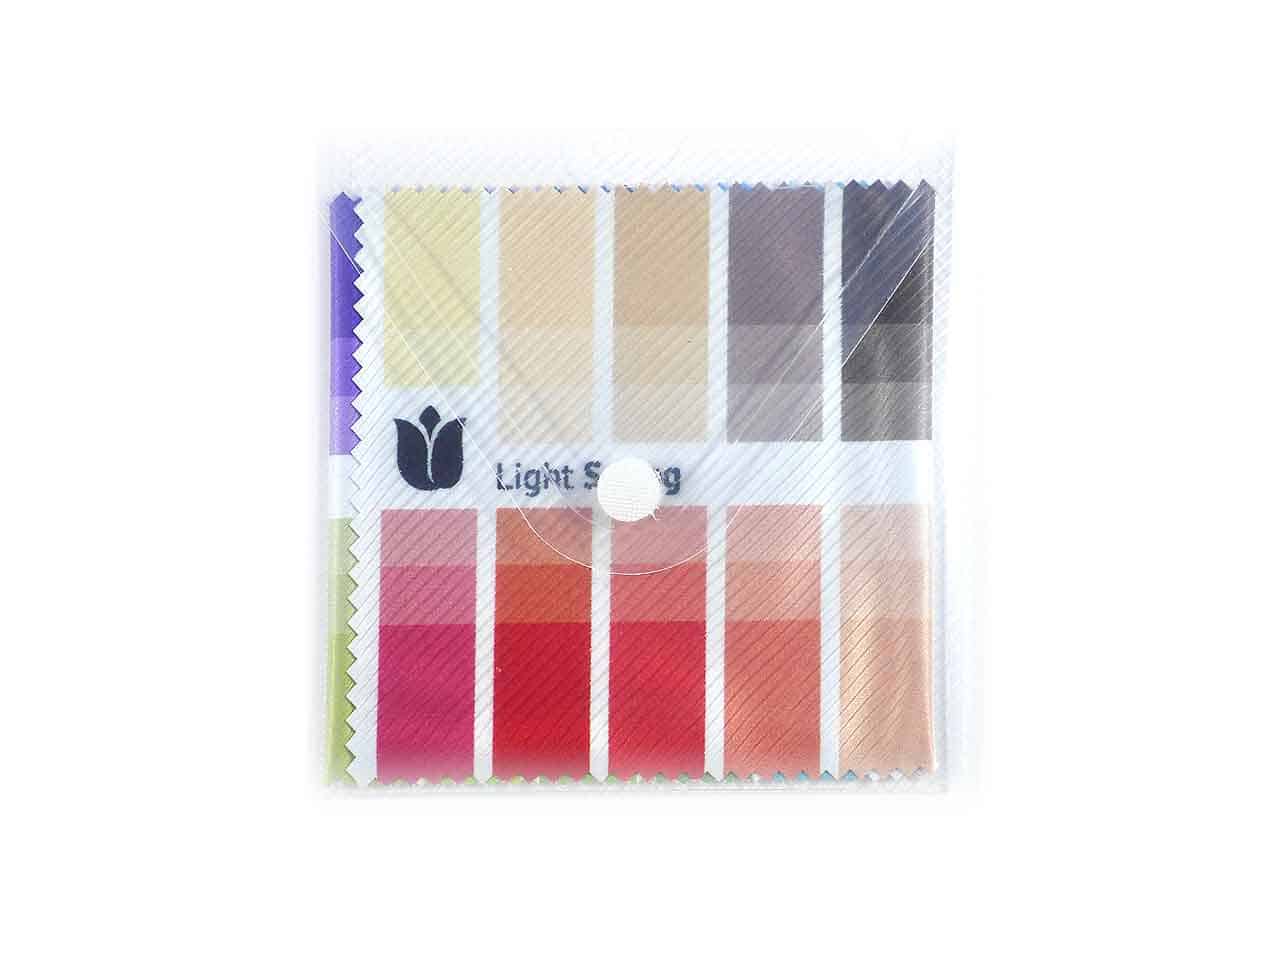 Fabric Color Swatch Light Spring with 30 type-specific Colors